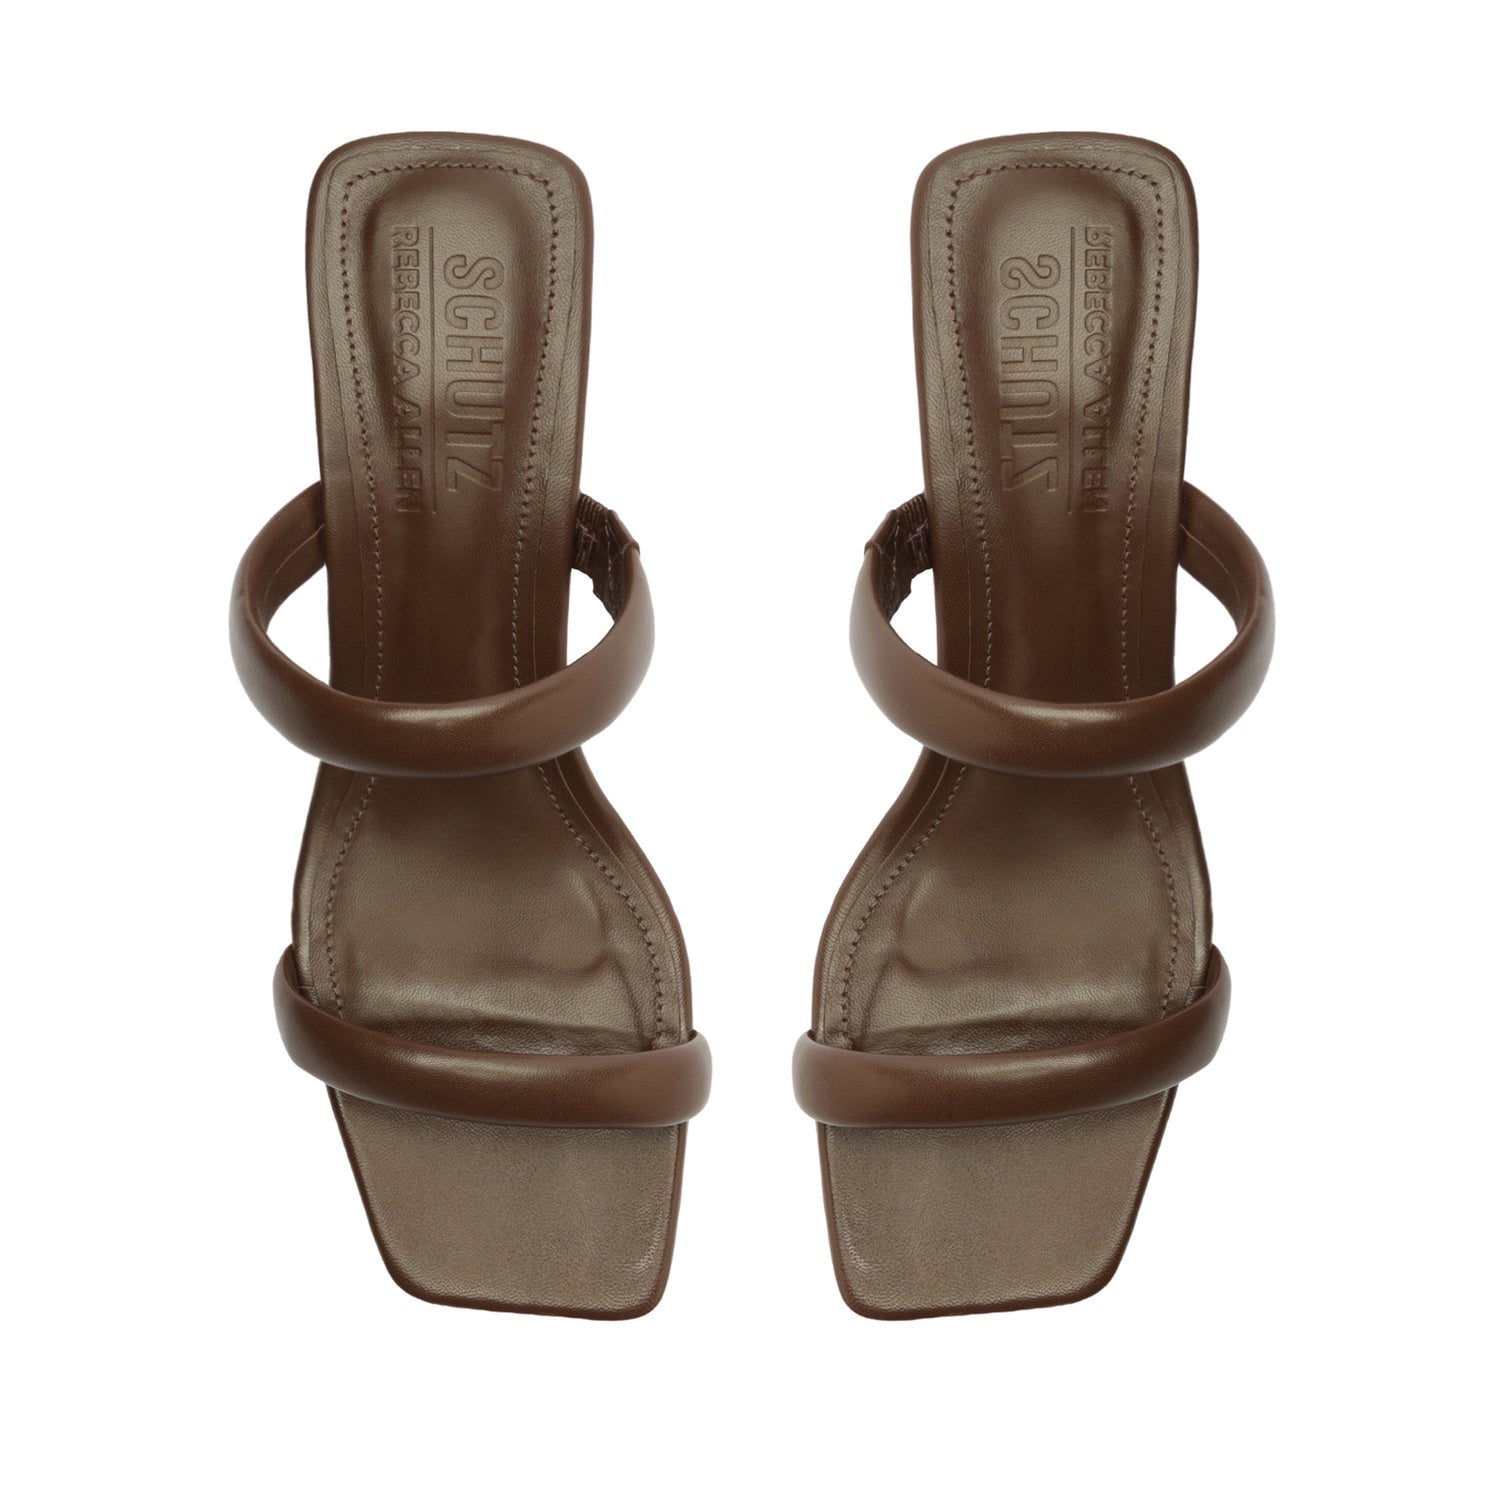 Ully Lo Rebecca Allen Nappa Leather Sandal Sandals Spring 23    - Schutz Shoes